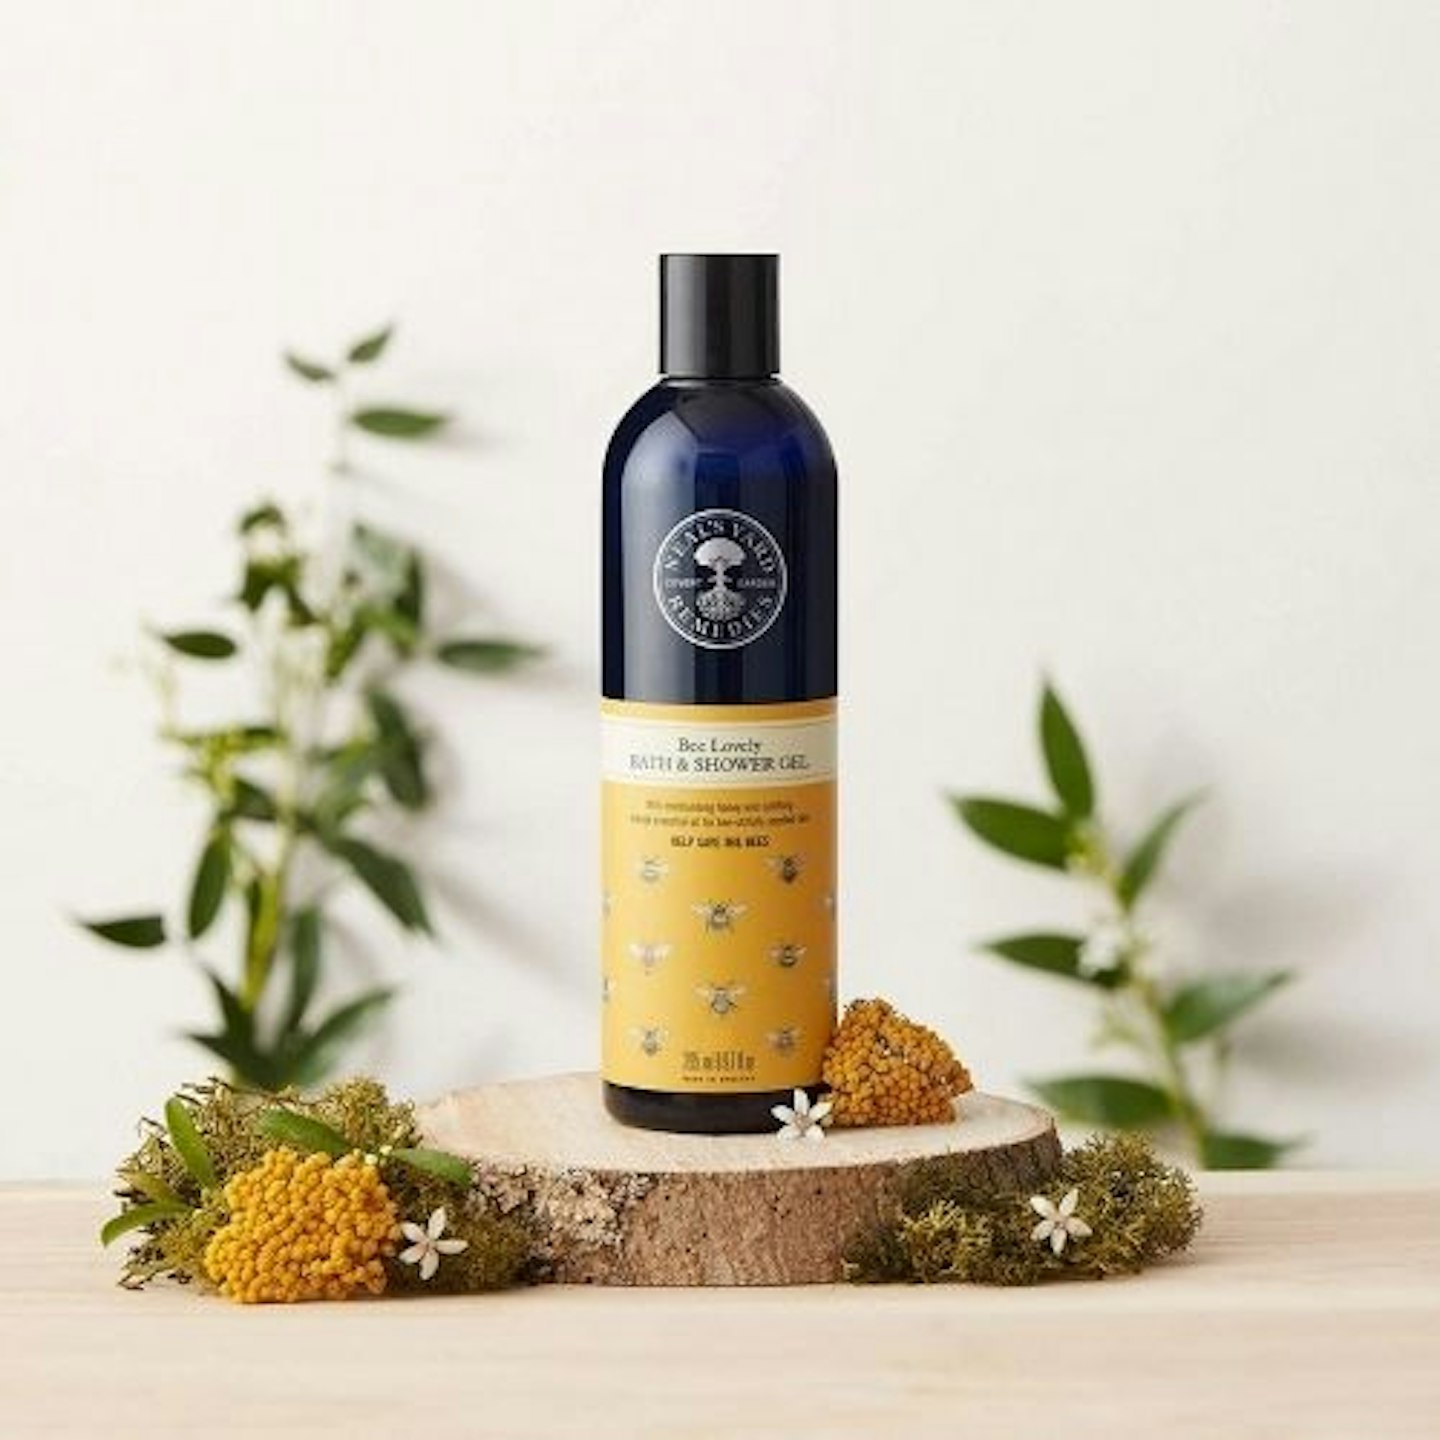 Neal's Yard Remedies Bee Lovely Bath and Shower Gel